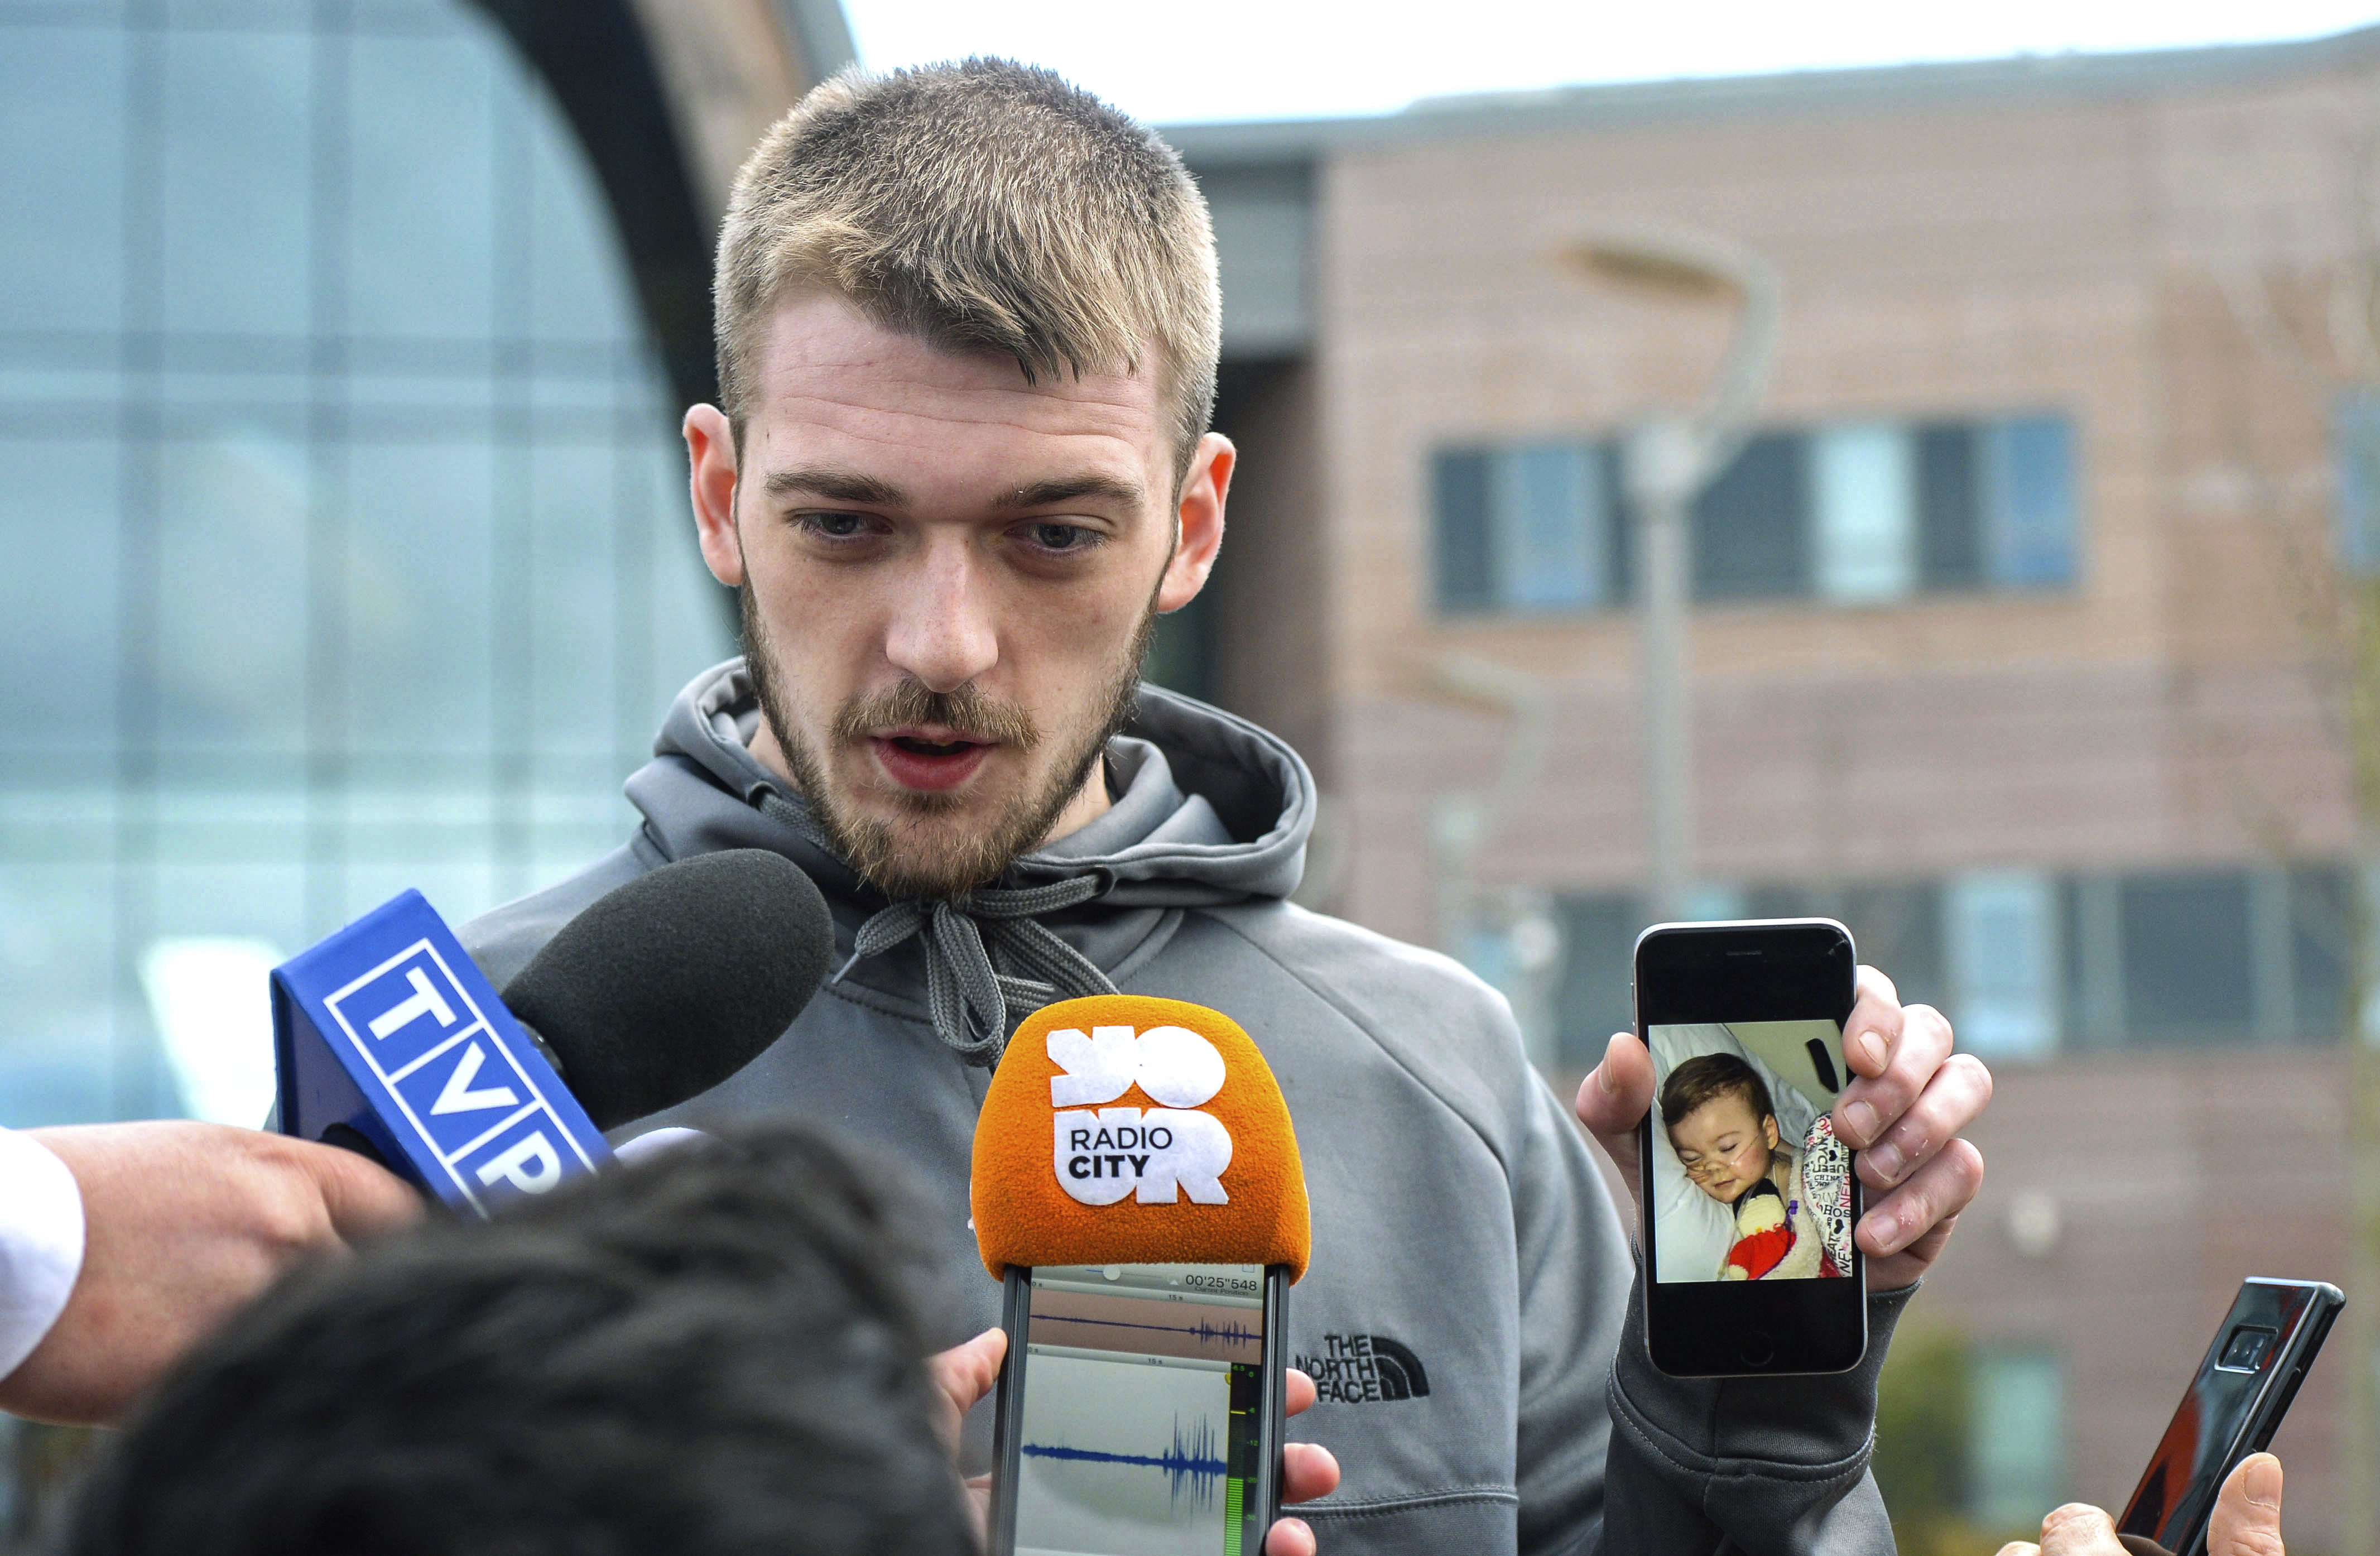 FILE - In this Thursday April 26, 2018 file photo Tom Evans holds up his phone showing a photo of his son Alfie as he speaks to the media outside Alder Hey Children's Hospital where the 23-month-old who has been at the centre of a life-support treatment dispute, in Liverpool, England. Kate James and Tom Evans, the parents, said on Facebook that 23-month-old Alfie Evans, who had an incurable degenerative brain condition and was at the center of a legal battle over his treatment, died early morning Saturday April 28, 2018. (Peter Byrne/PA via AP, File)